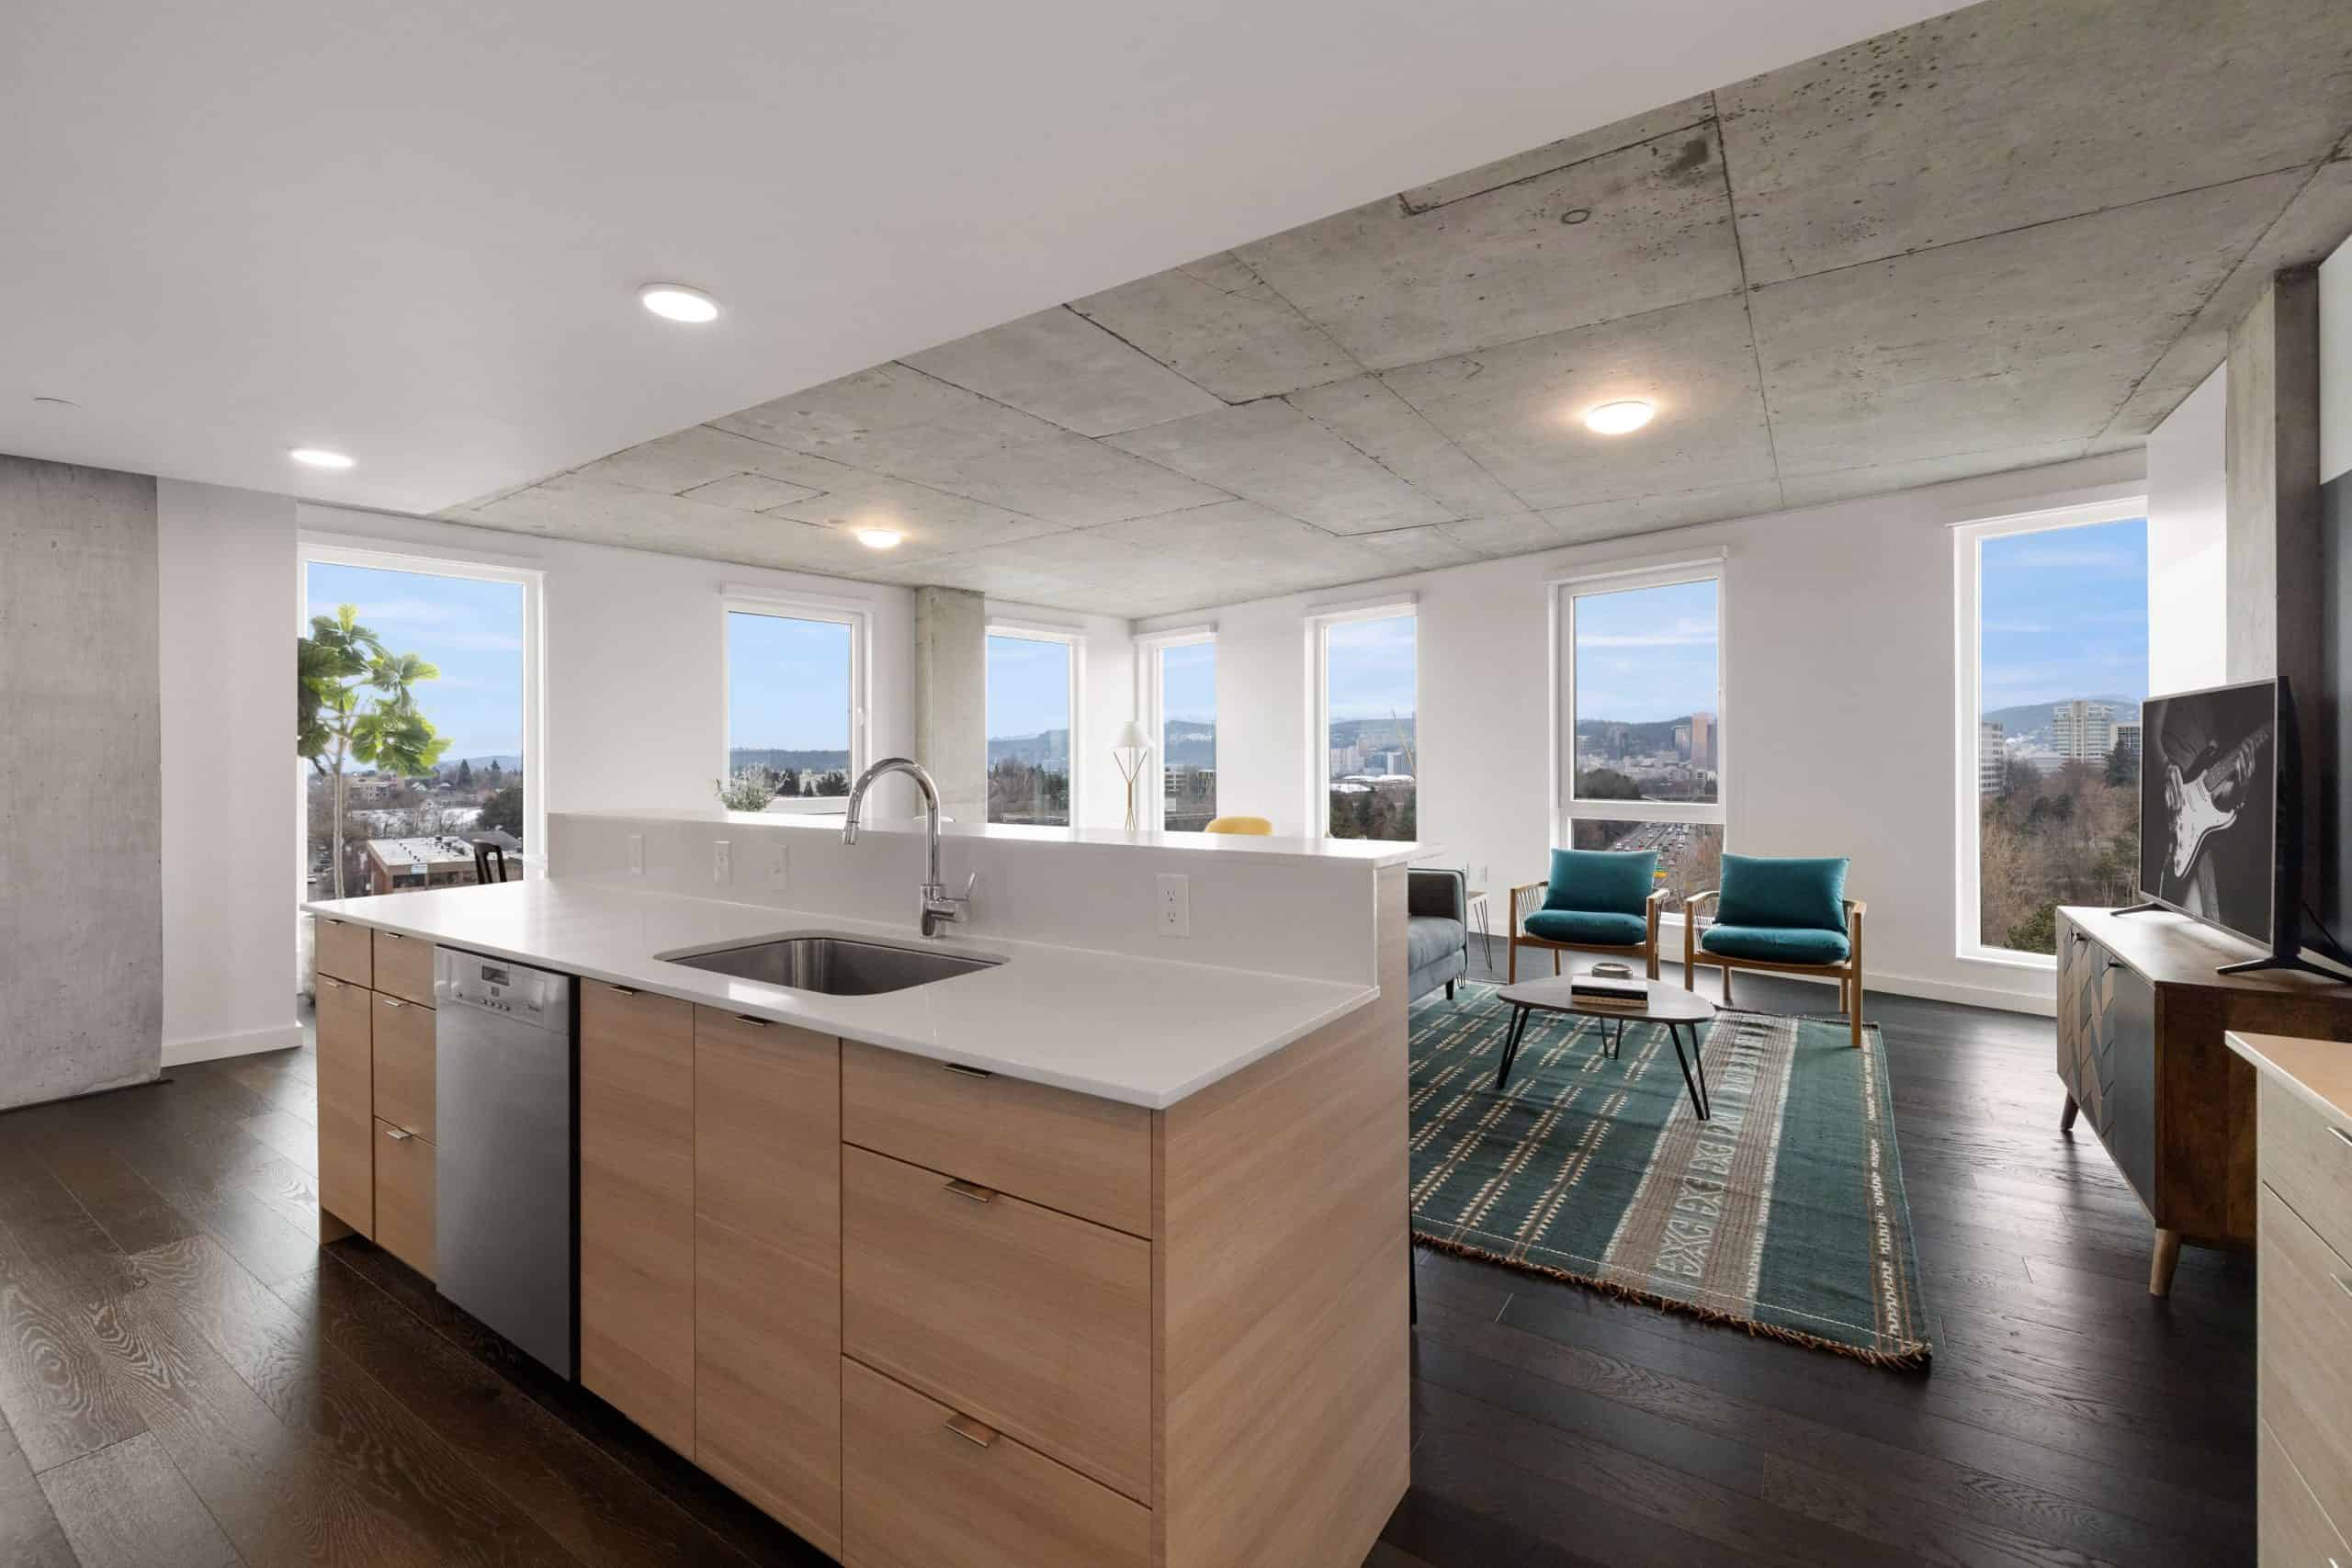 Penthouse kitchen and living area